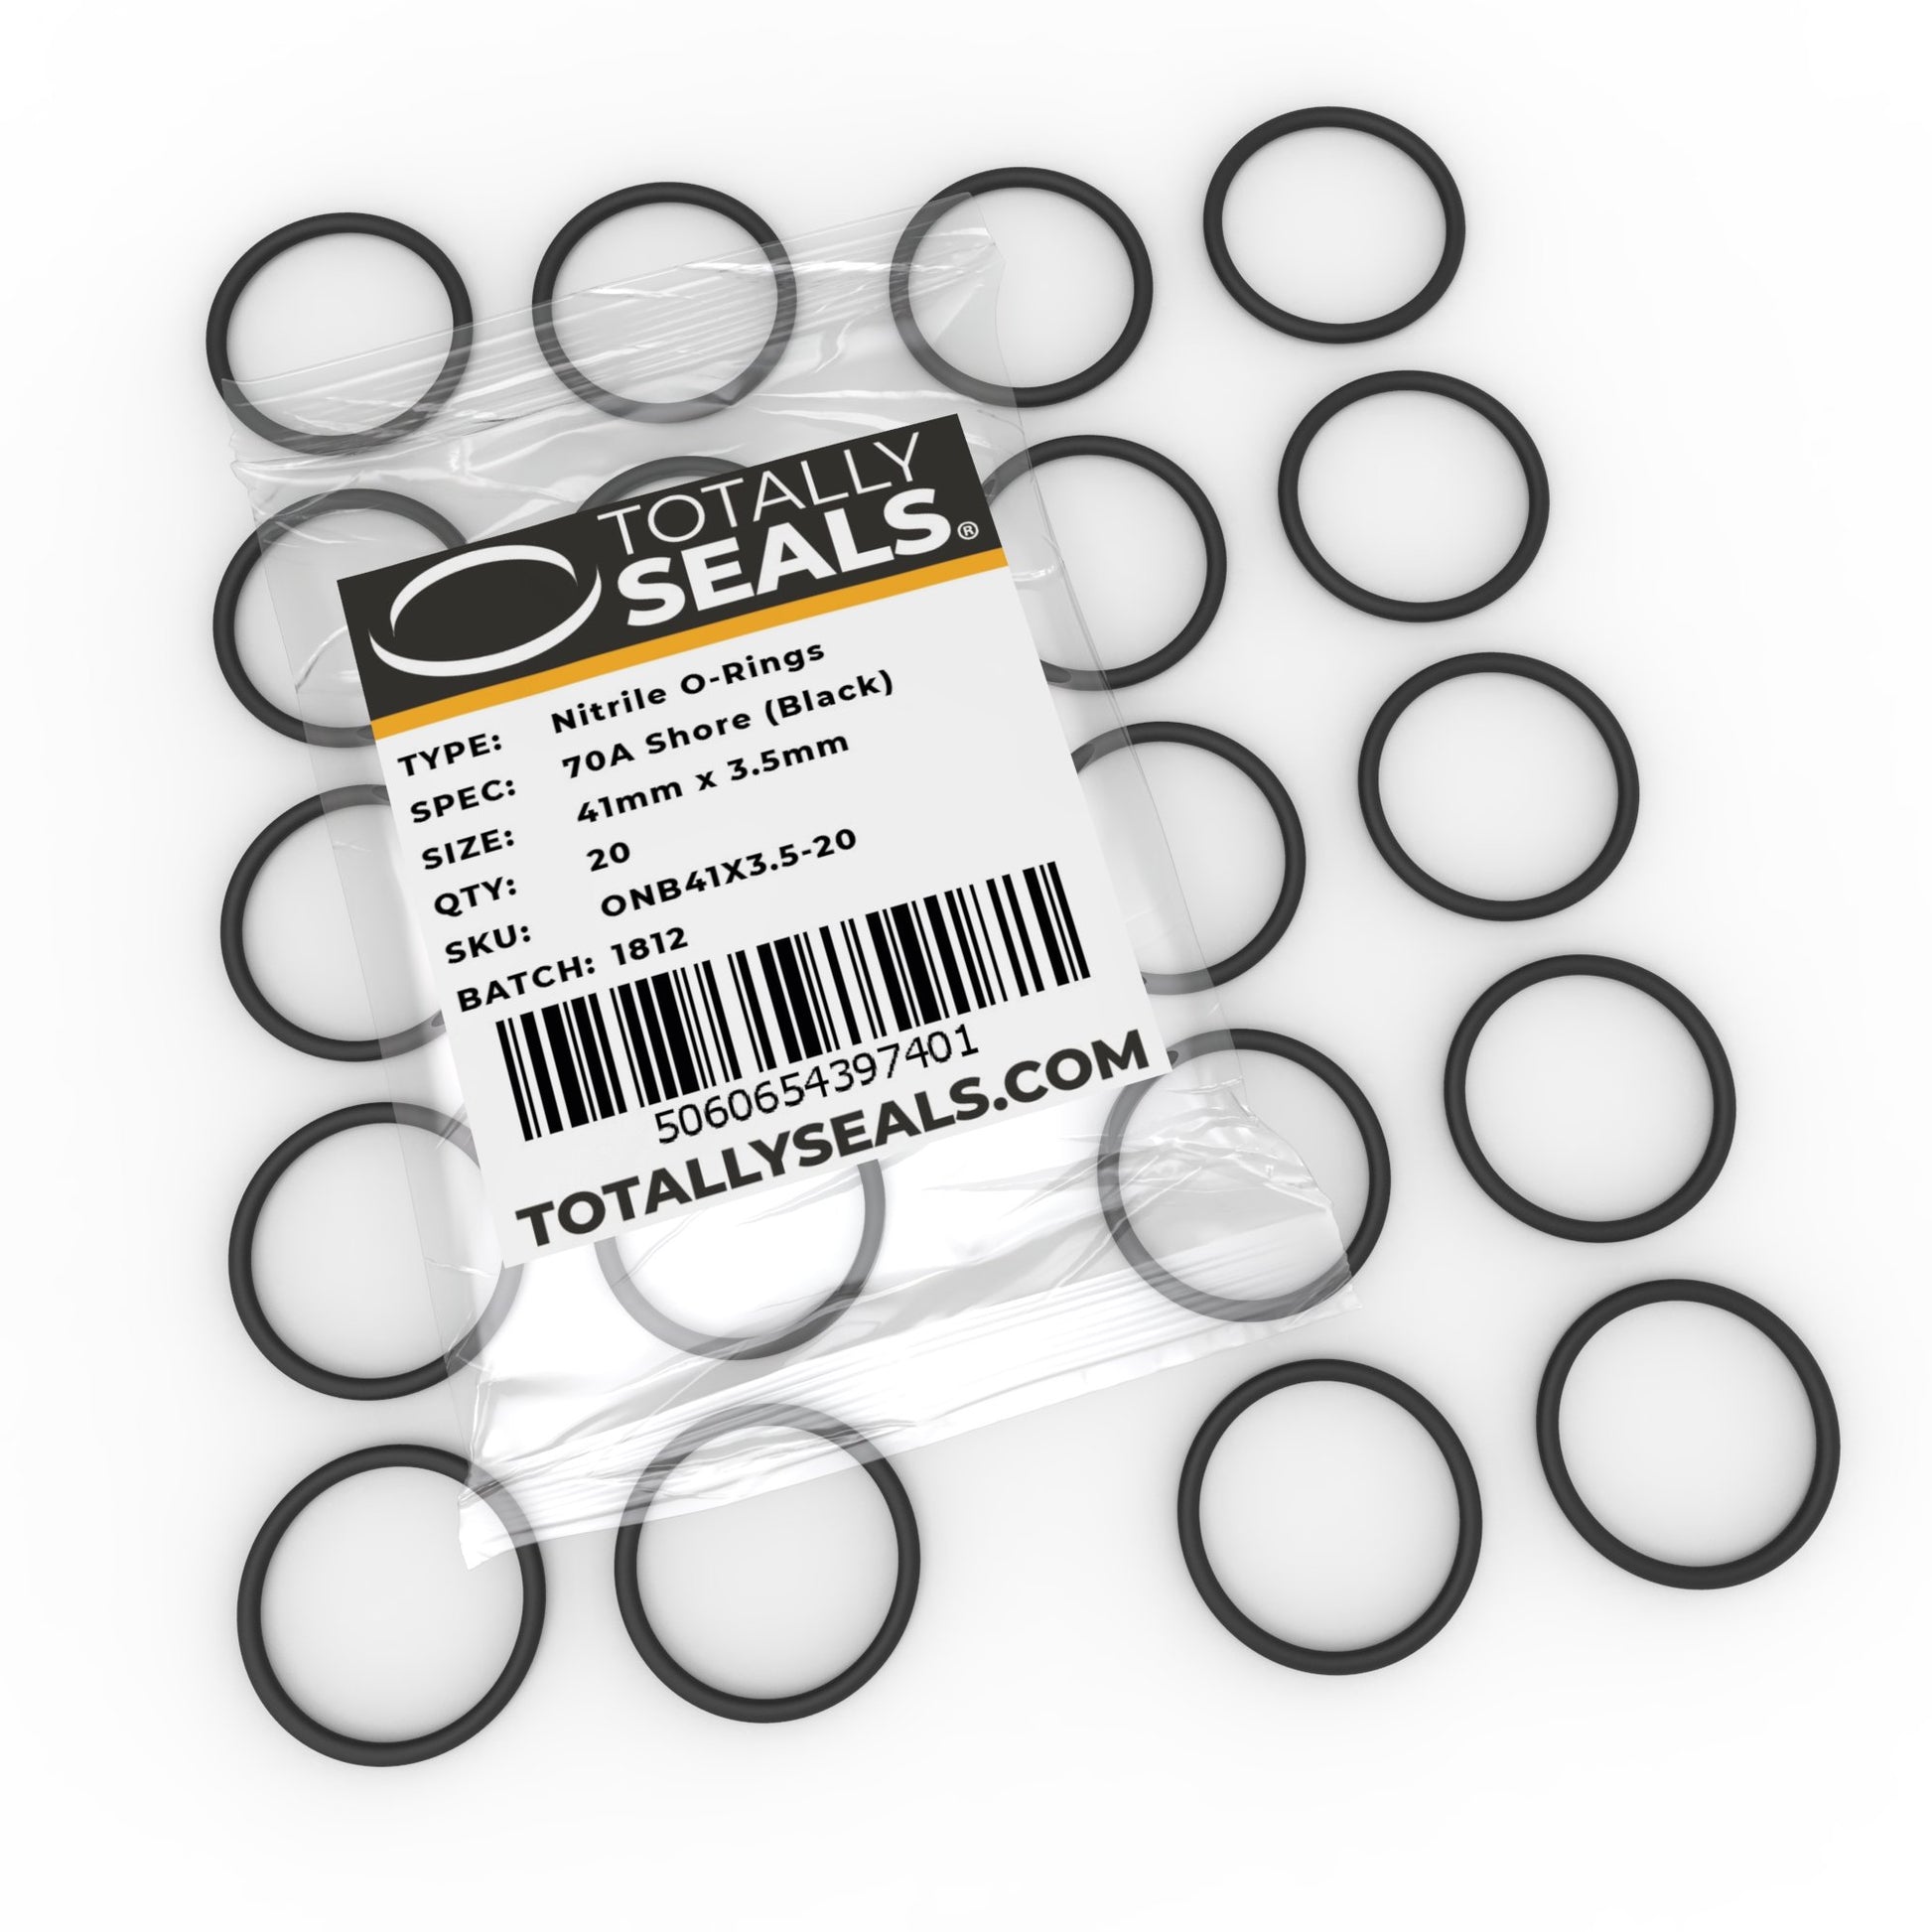 41mm x 3.5mm (48mm OD) Nitrile O-Rings - Totally Seals®